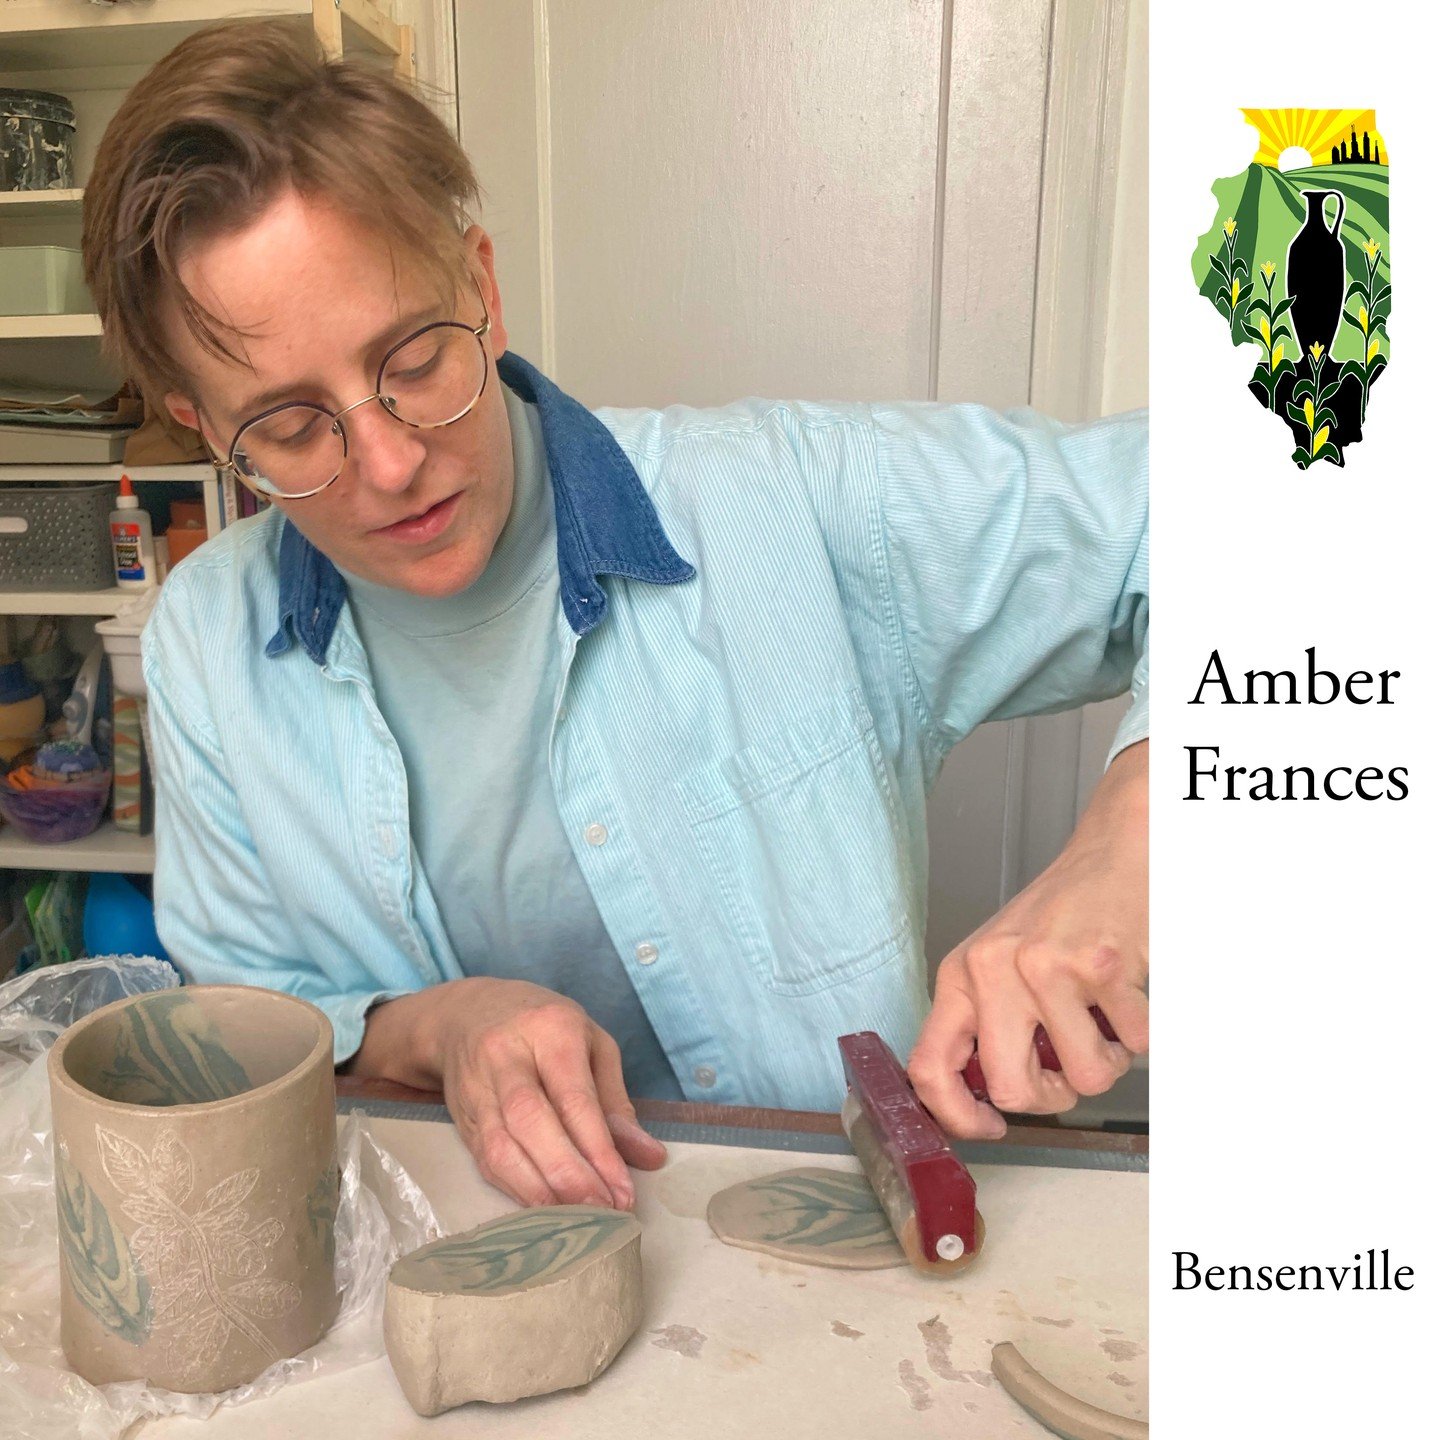 The final guest artist we want to introduce you to is Amber Frances (They/Them), who is joining the northern Illinois Pottery tour for the first time!

Amber Frances is a non binary potter working and living in Chicago. They received their BFA in Scu